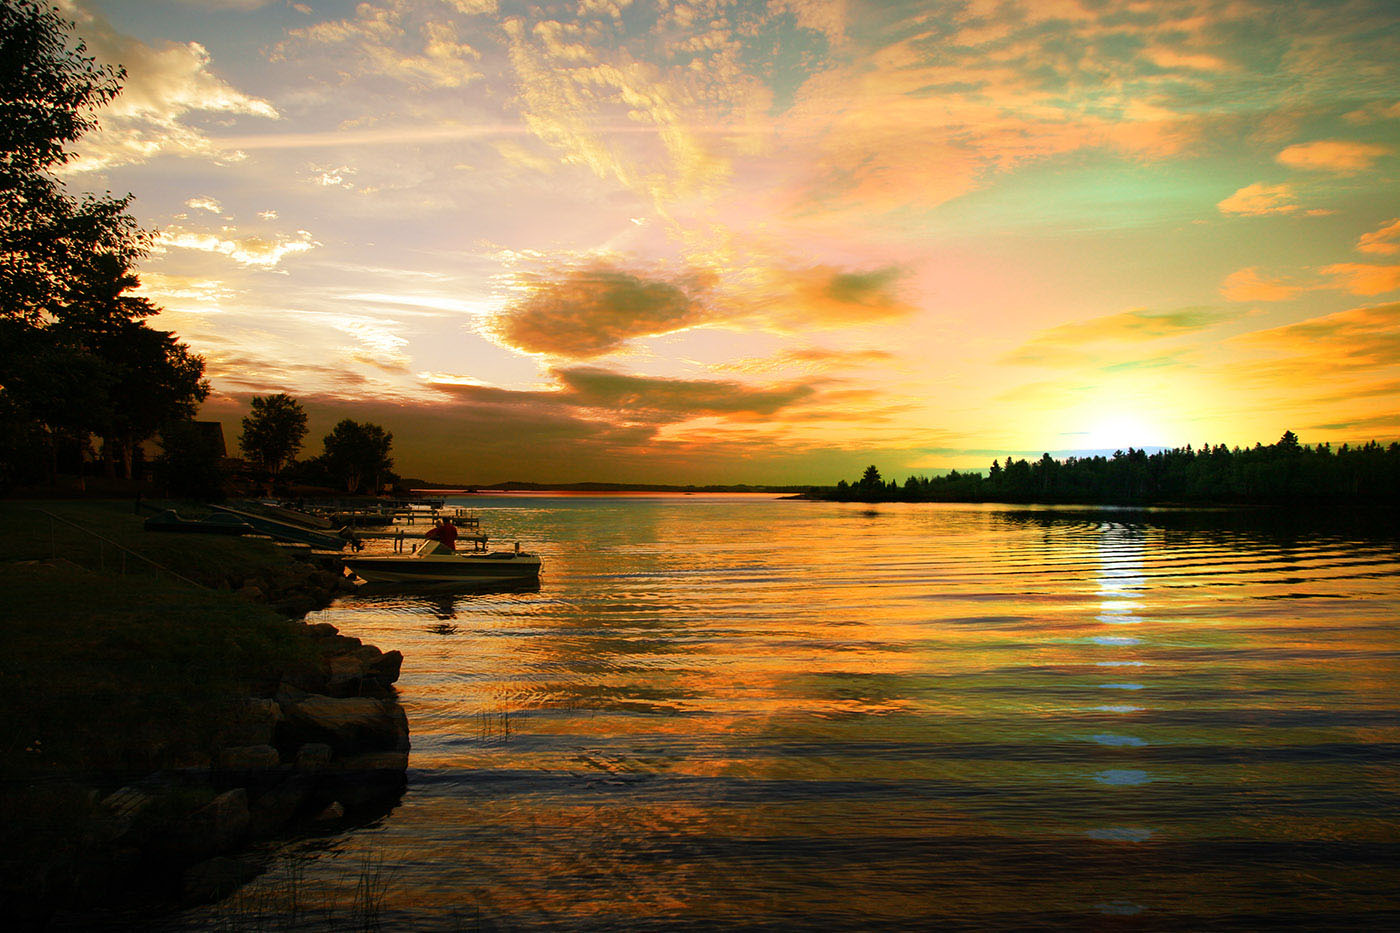 Perfect Sunset Lake - Stock Photos, Pictures & Images